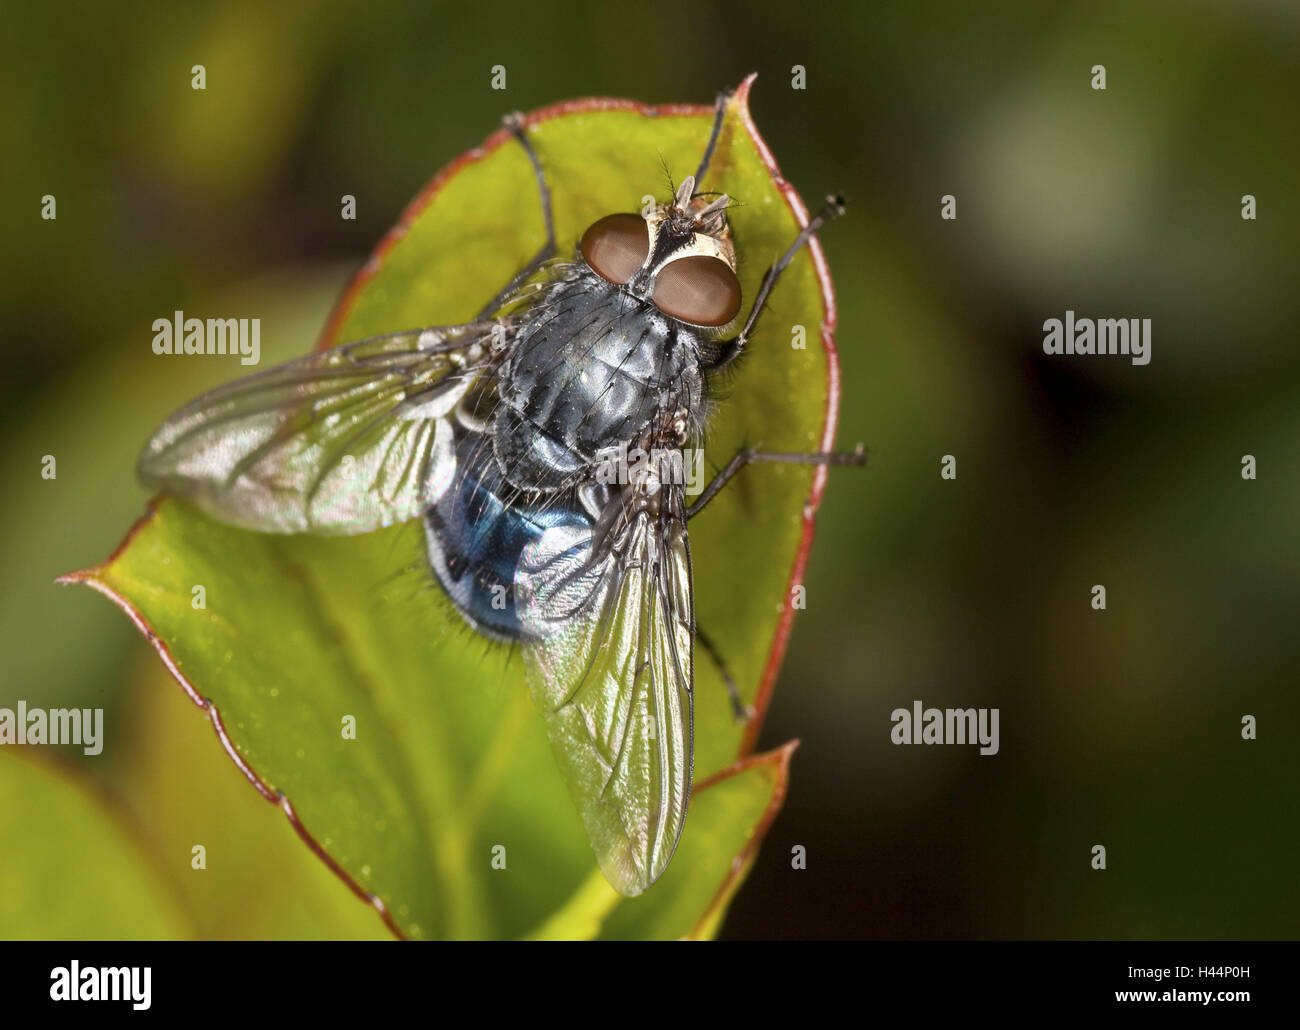 Leaves, blue blowfly, Calliphora, vomitoria, close up, Majorca, nature, animal, insect, hymenoptera, fly, wing, transparent, fluorescent, eyes, whole bodies, Stock Photo